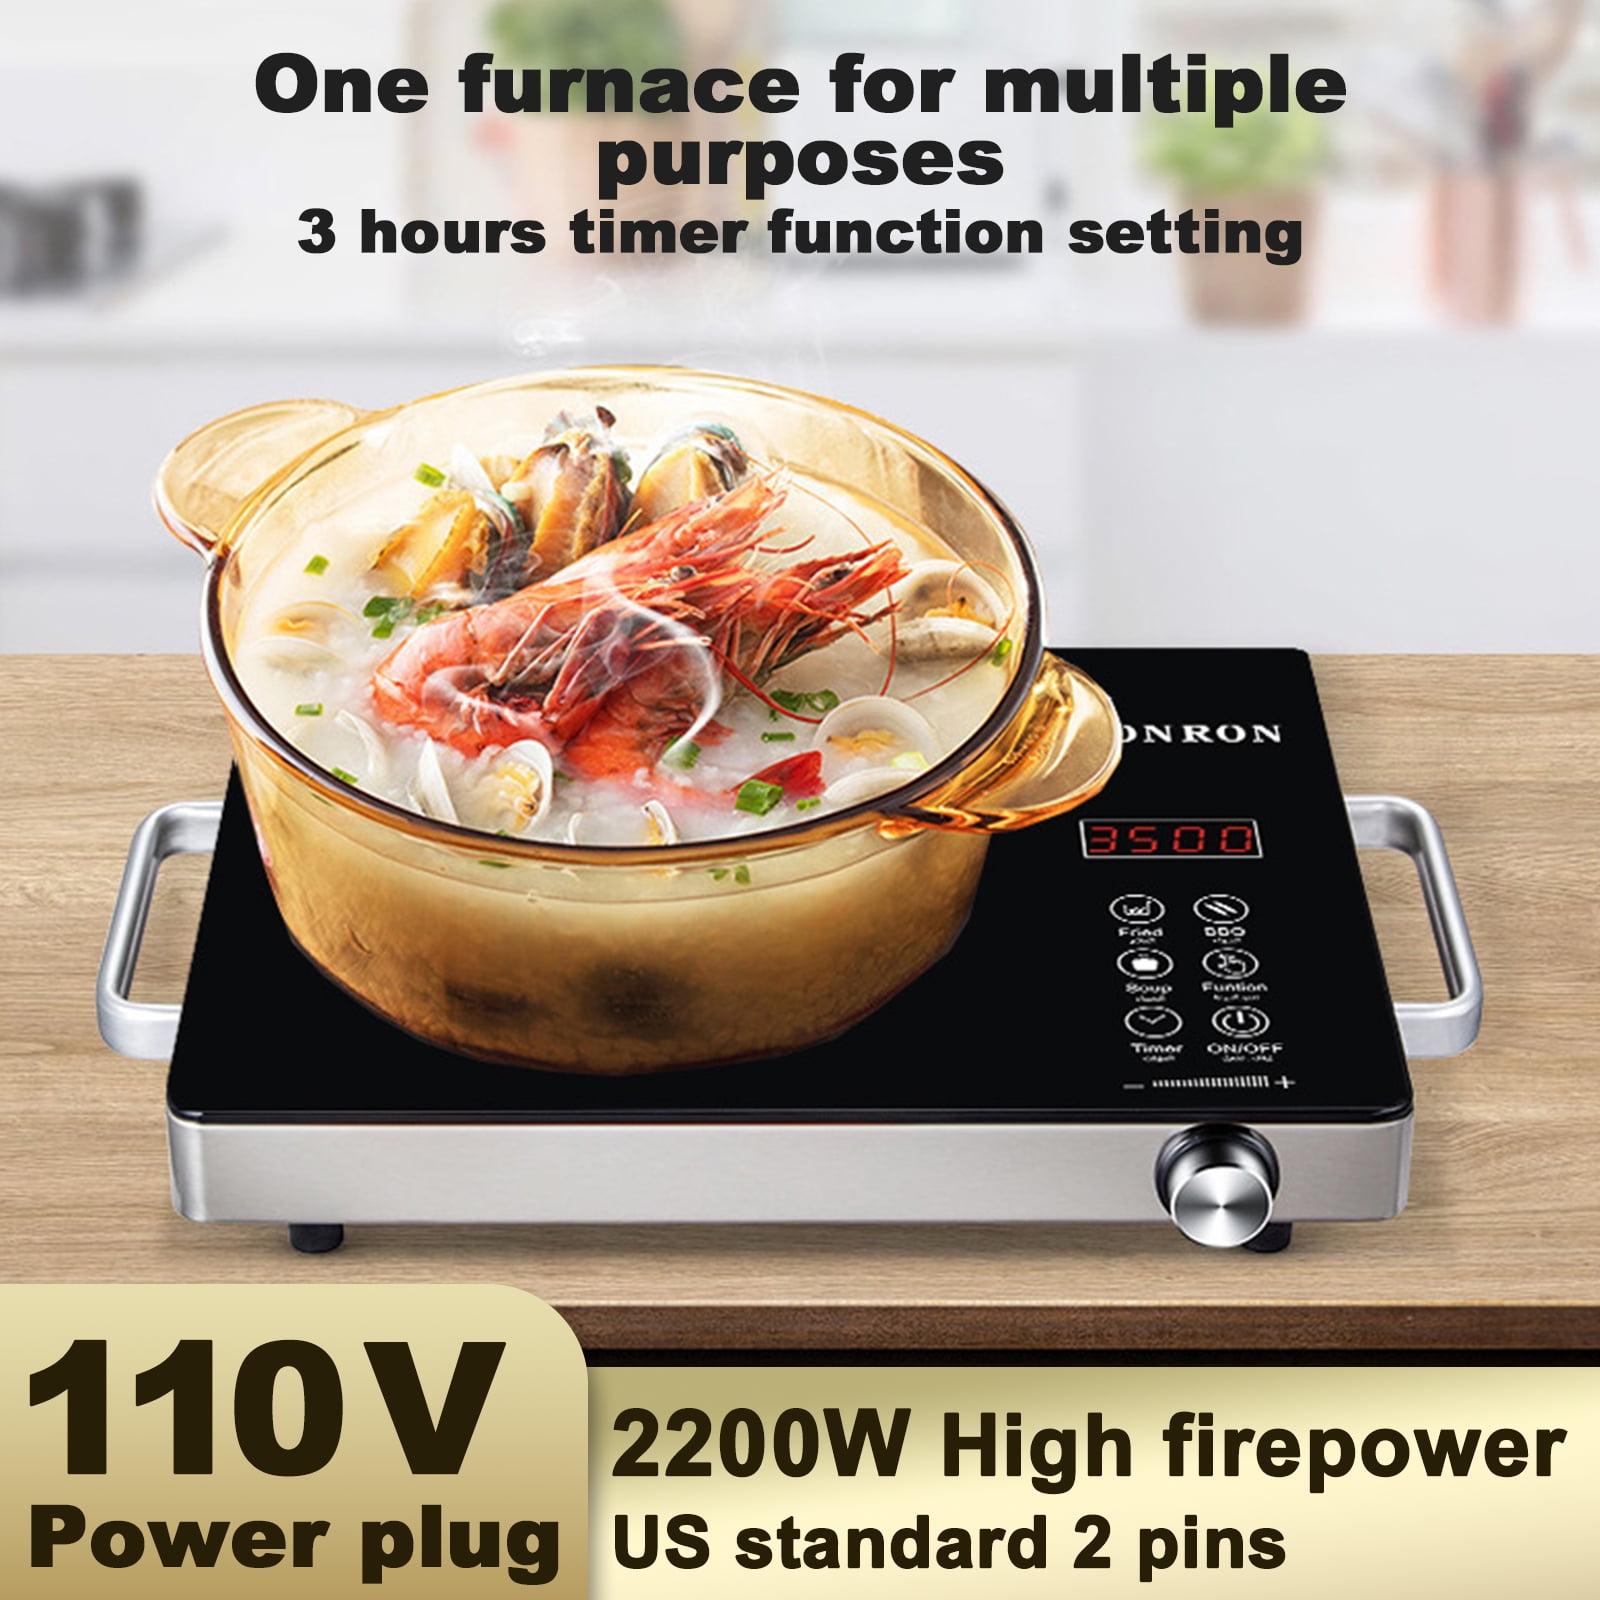 Wobythan 3500W Hot Plate Electric Ceramic Stove Infrared Induction Cooker Home Cooktop Cooking Furnace US 110V, Size: 42.5